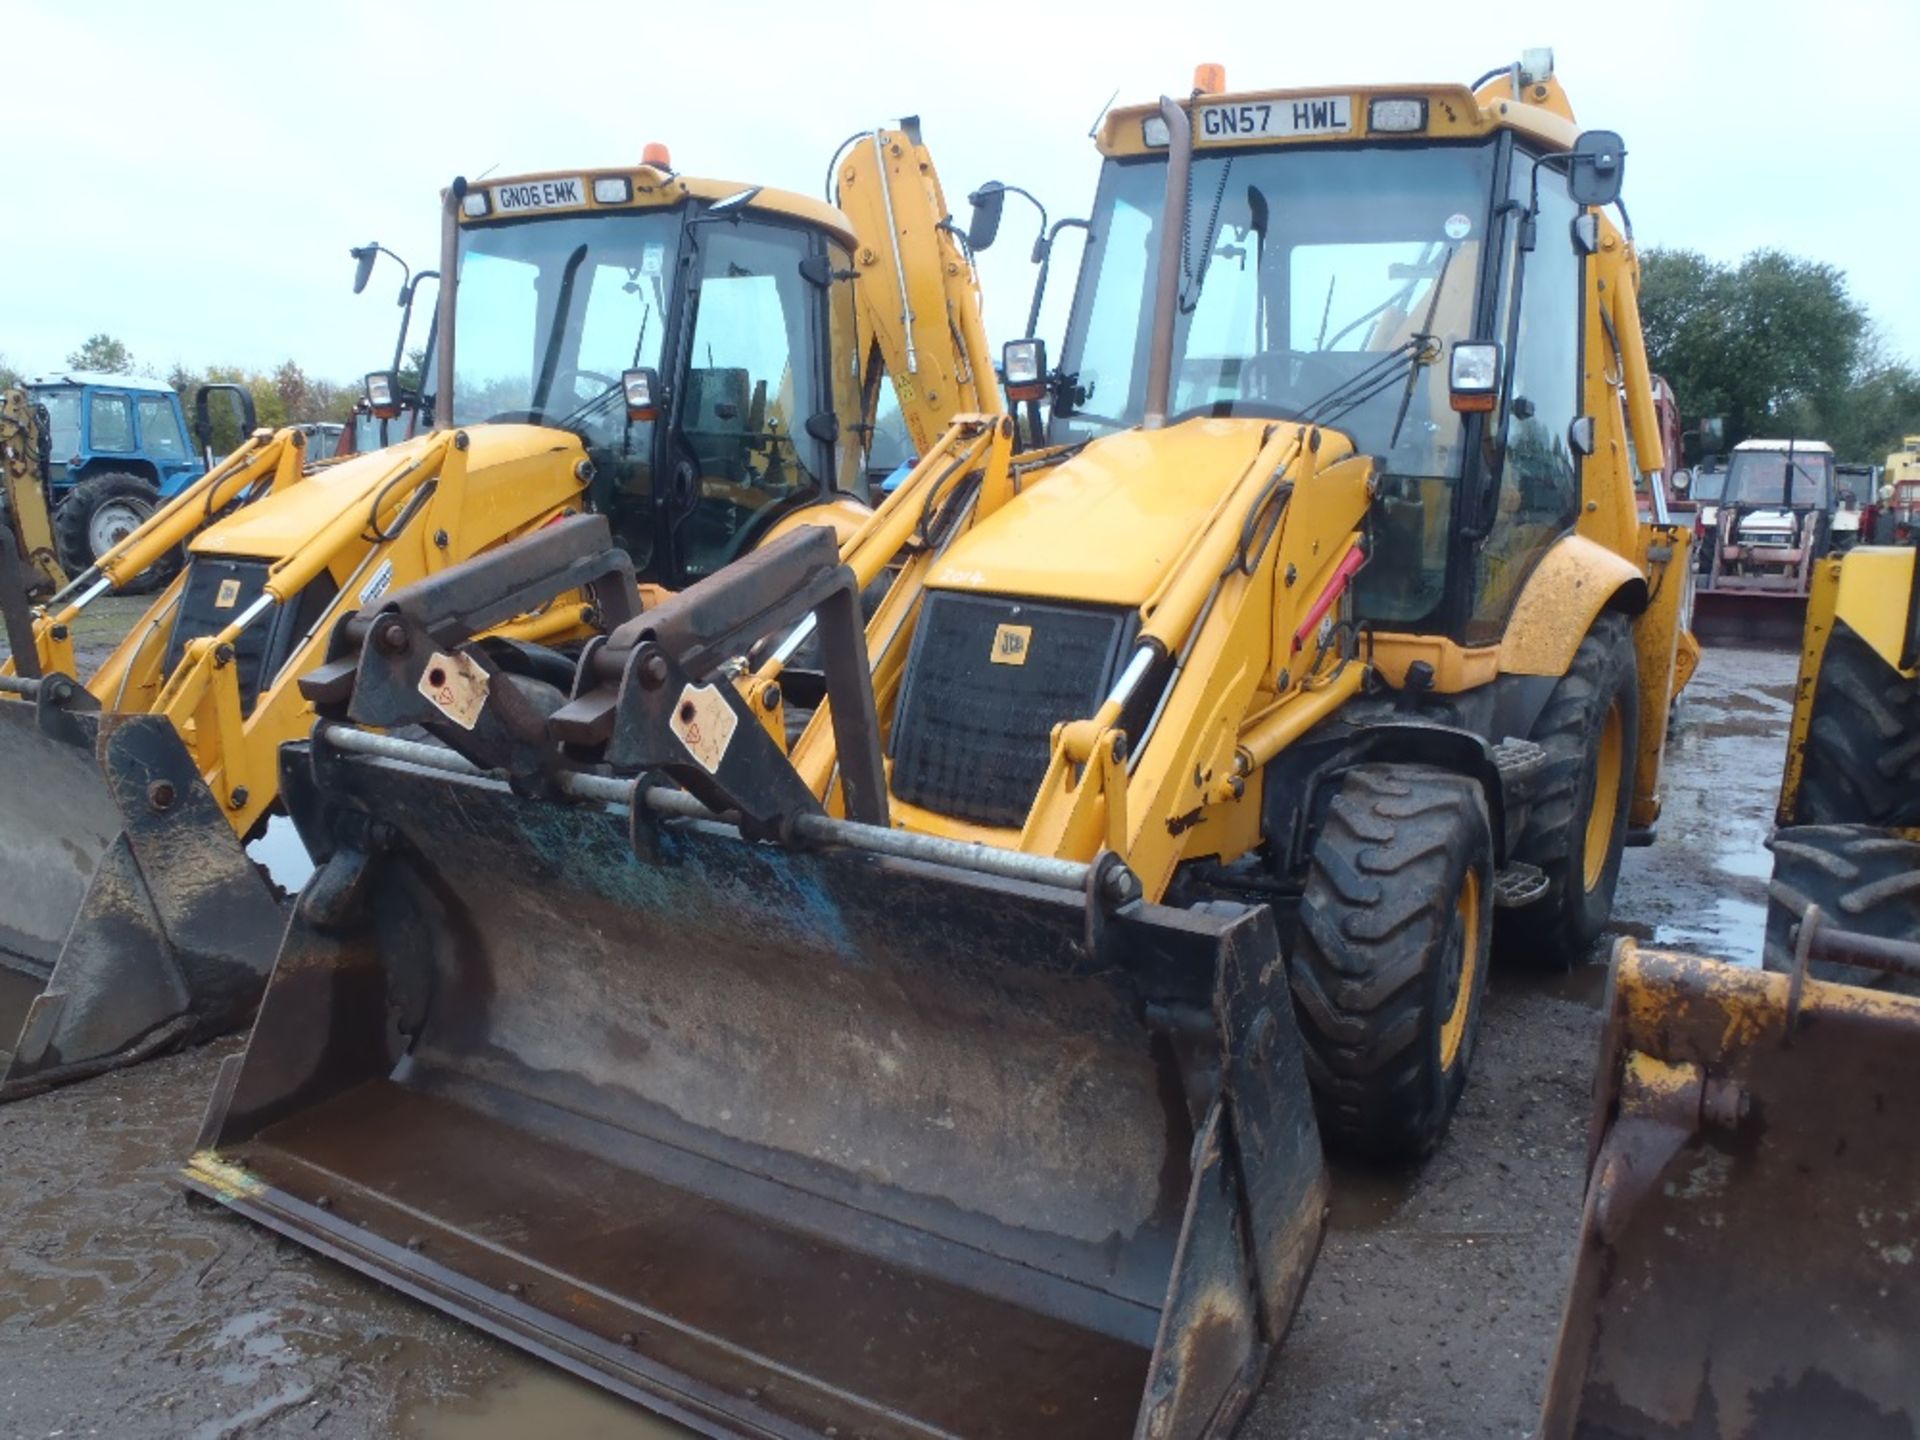 2008 JCB 3CX Sitemaster 4x4 with 4 in 1 Bucket, Extending Dipper Arm & Quick Hitch. V5 will be